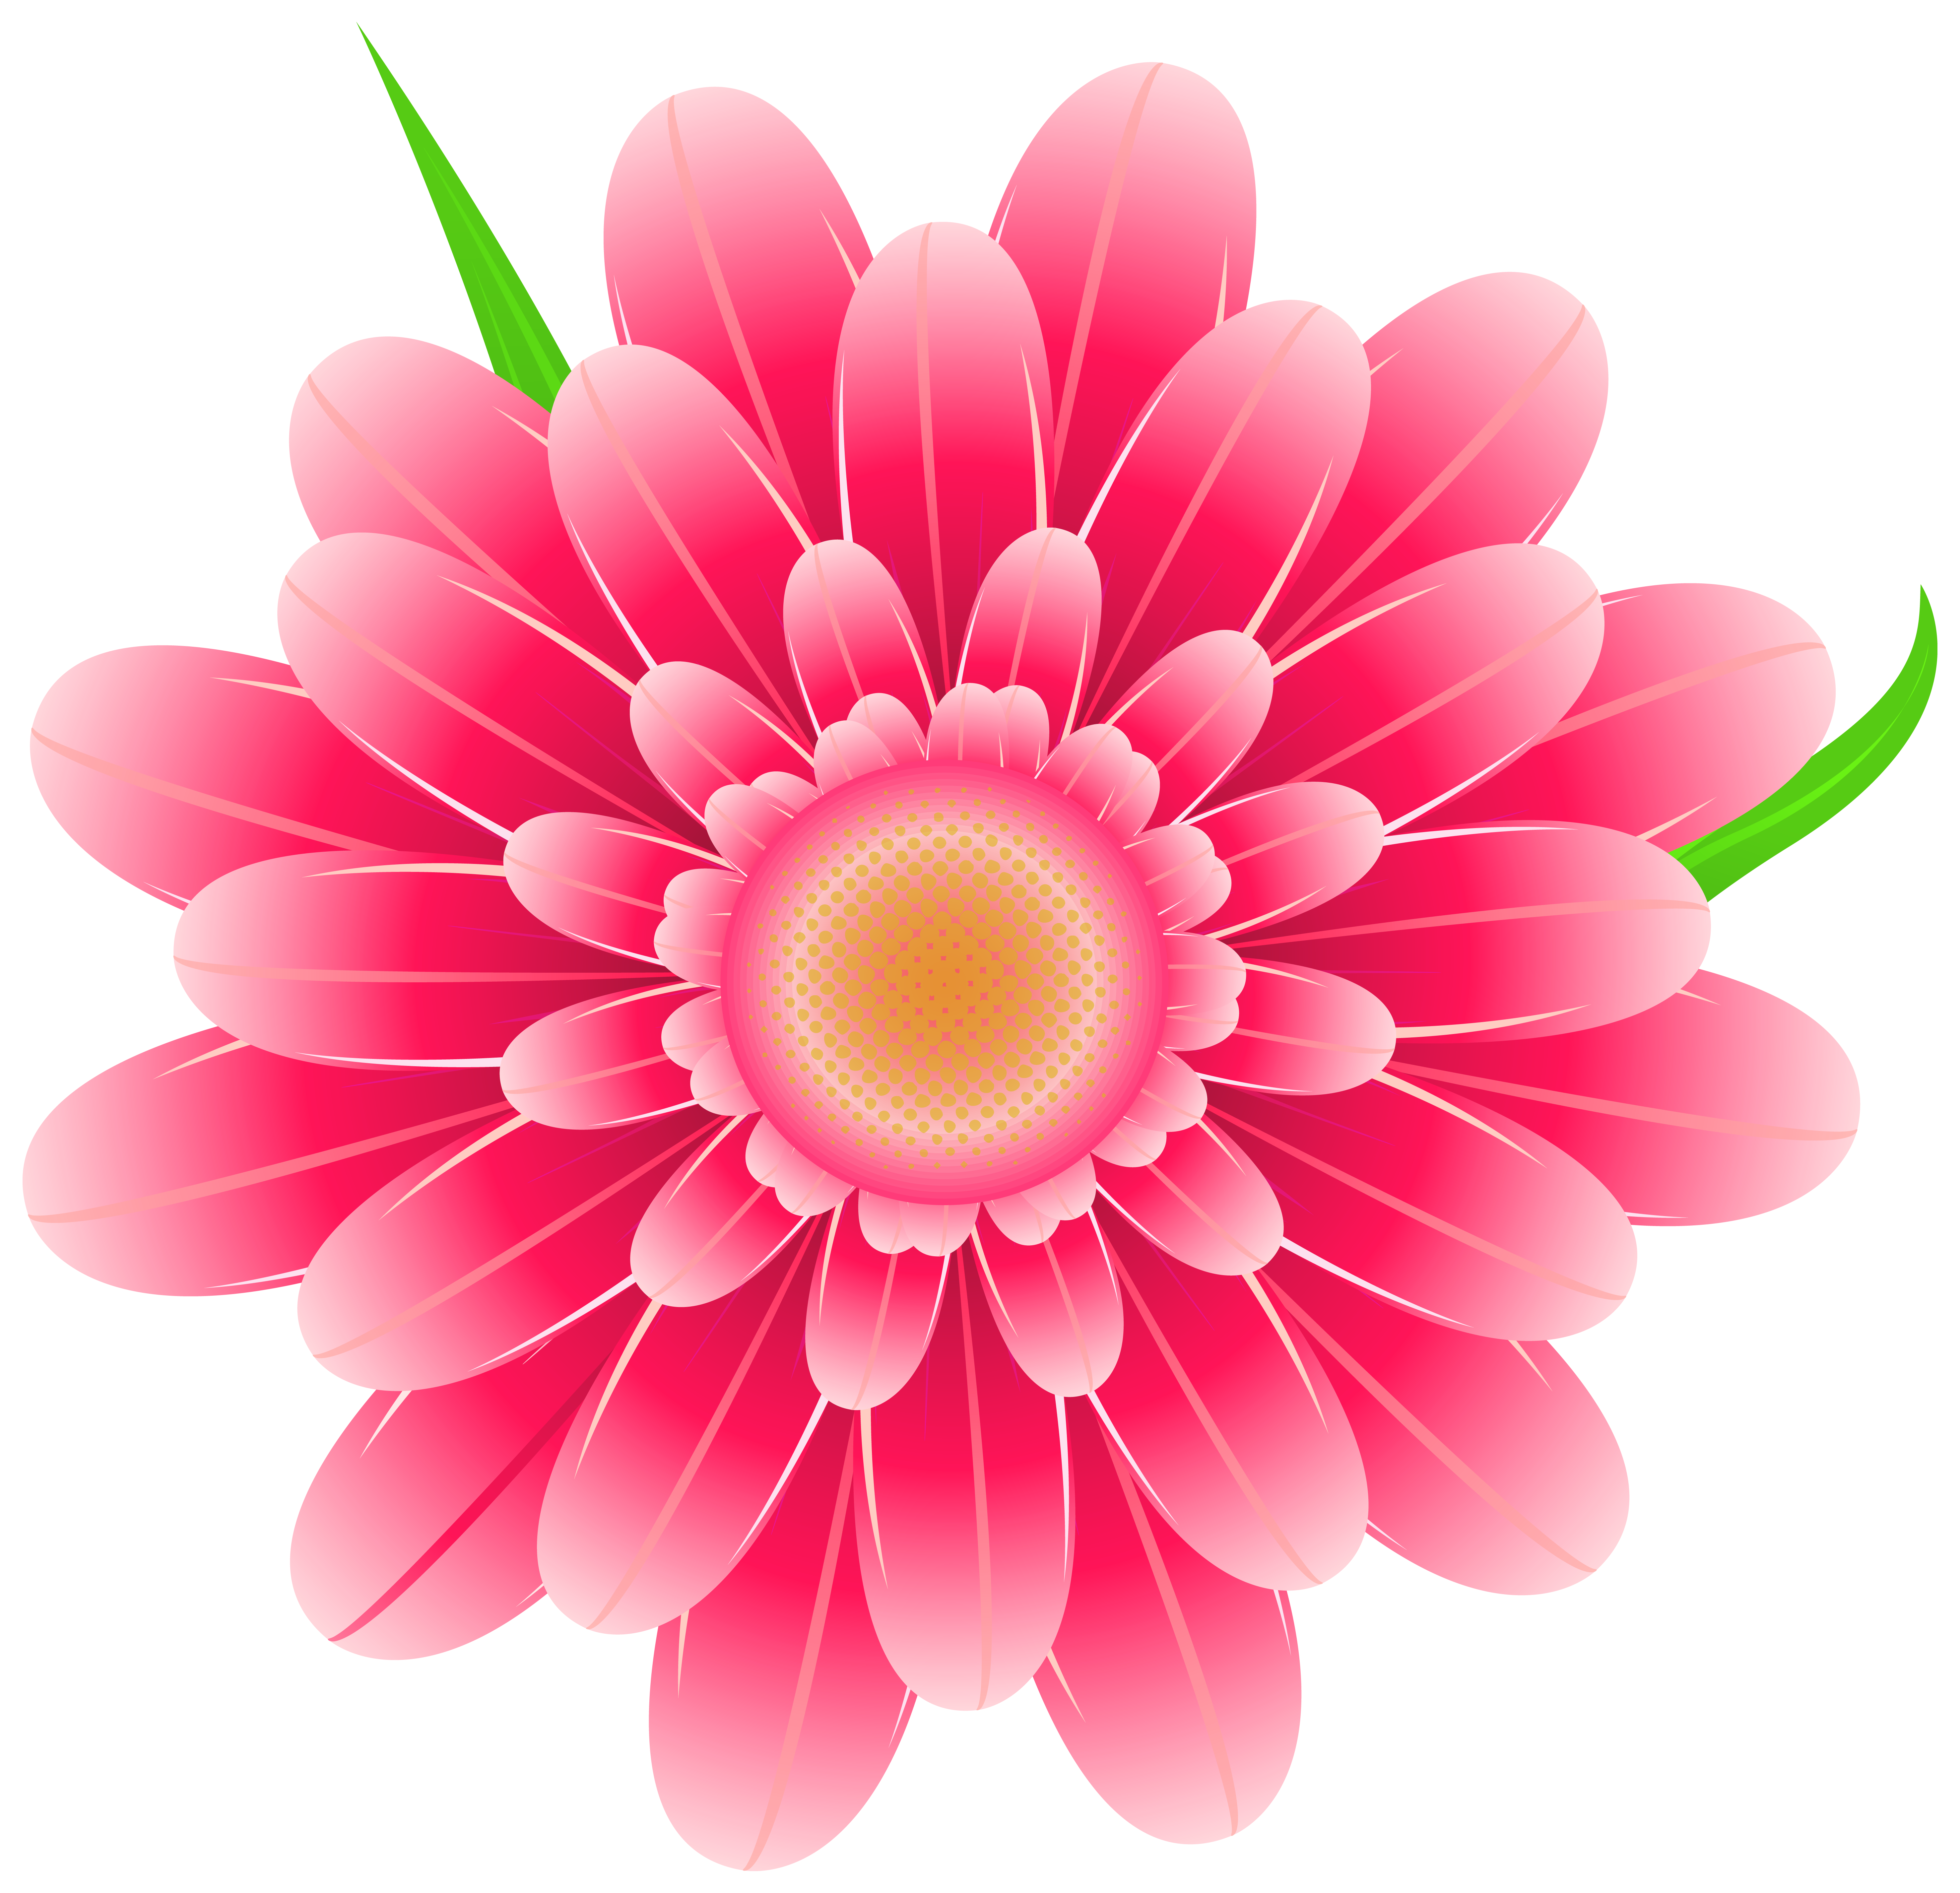 Transparent Pink Flower Clipart PNG Image​ | Gallery Yopriceville -  High-Quality Free Images and Transparent PNG Clipart